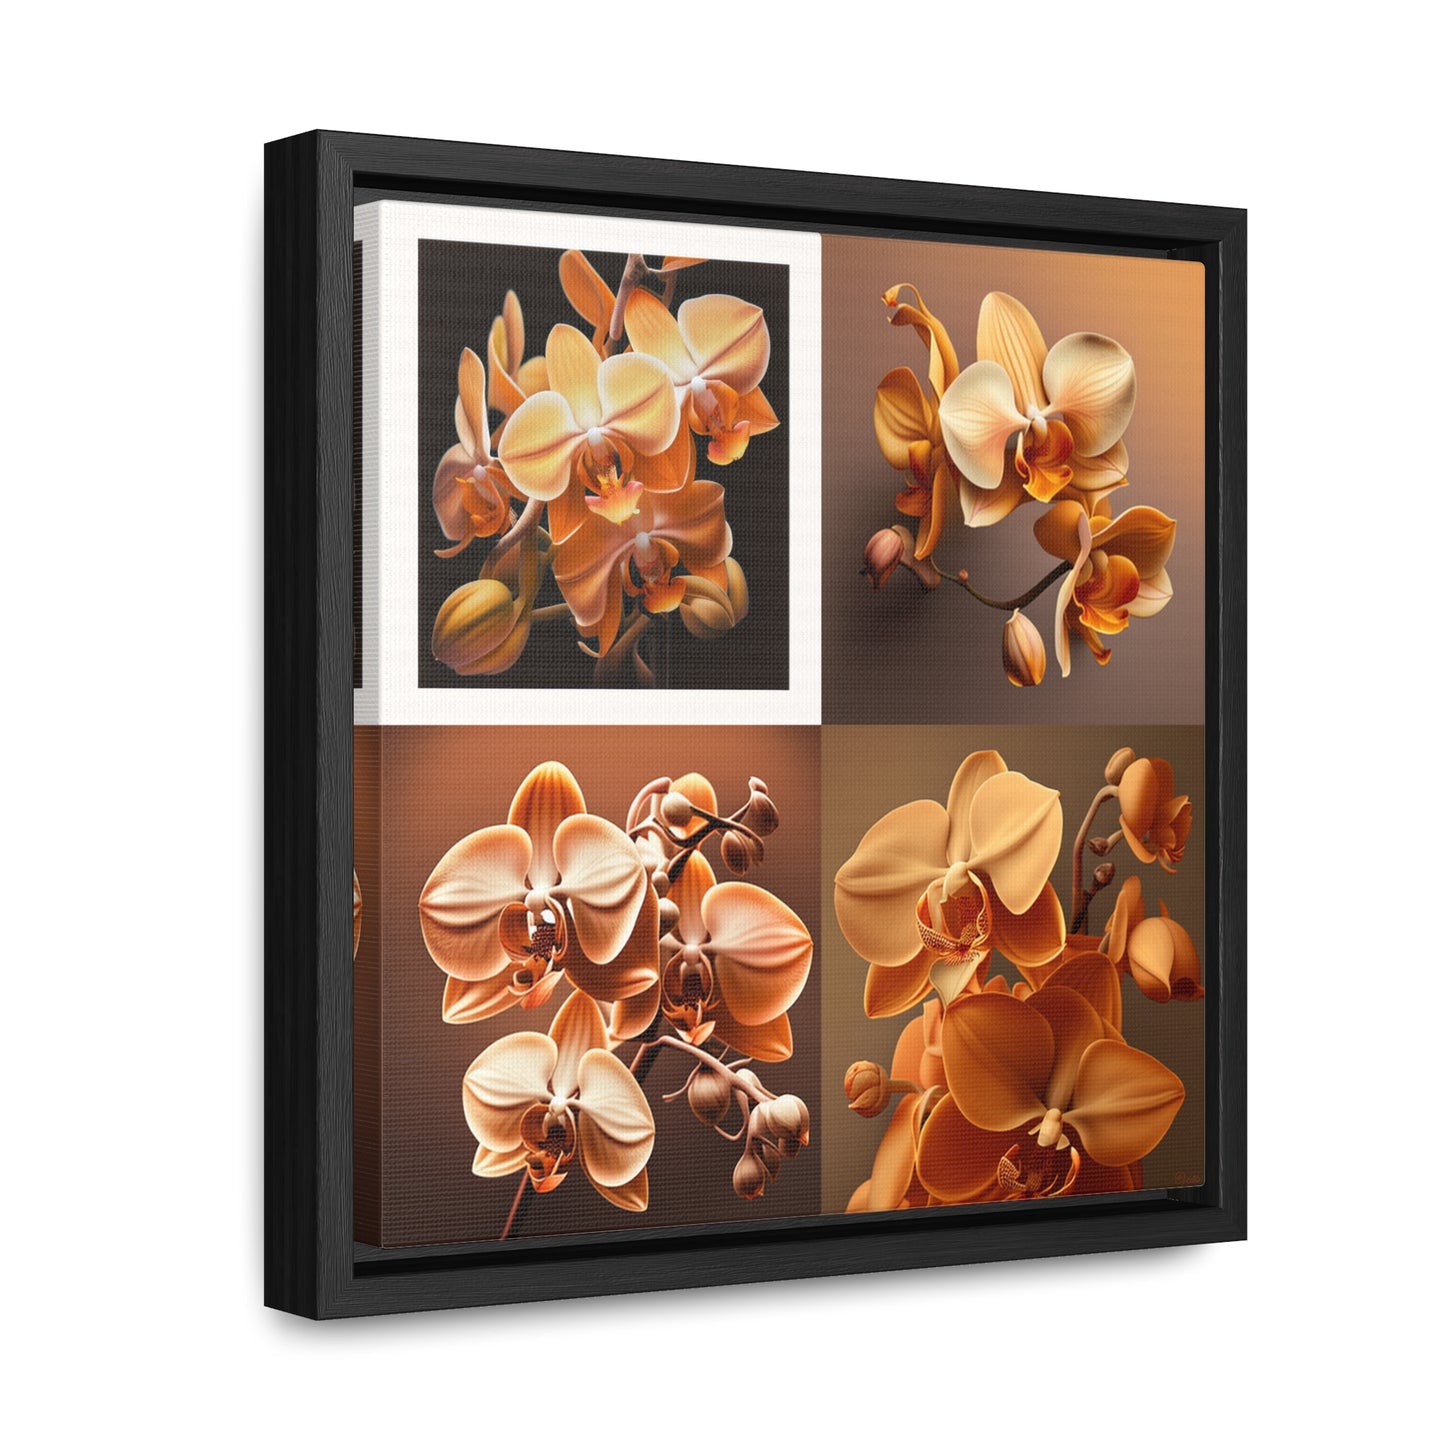 Gallery Canvas Wraps, Square Frame orchid pedals 5